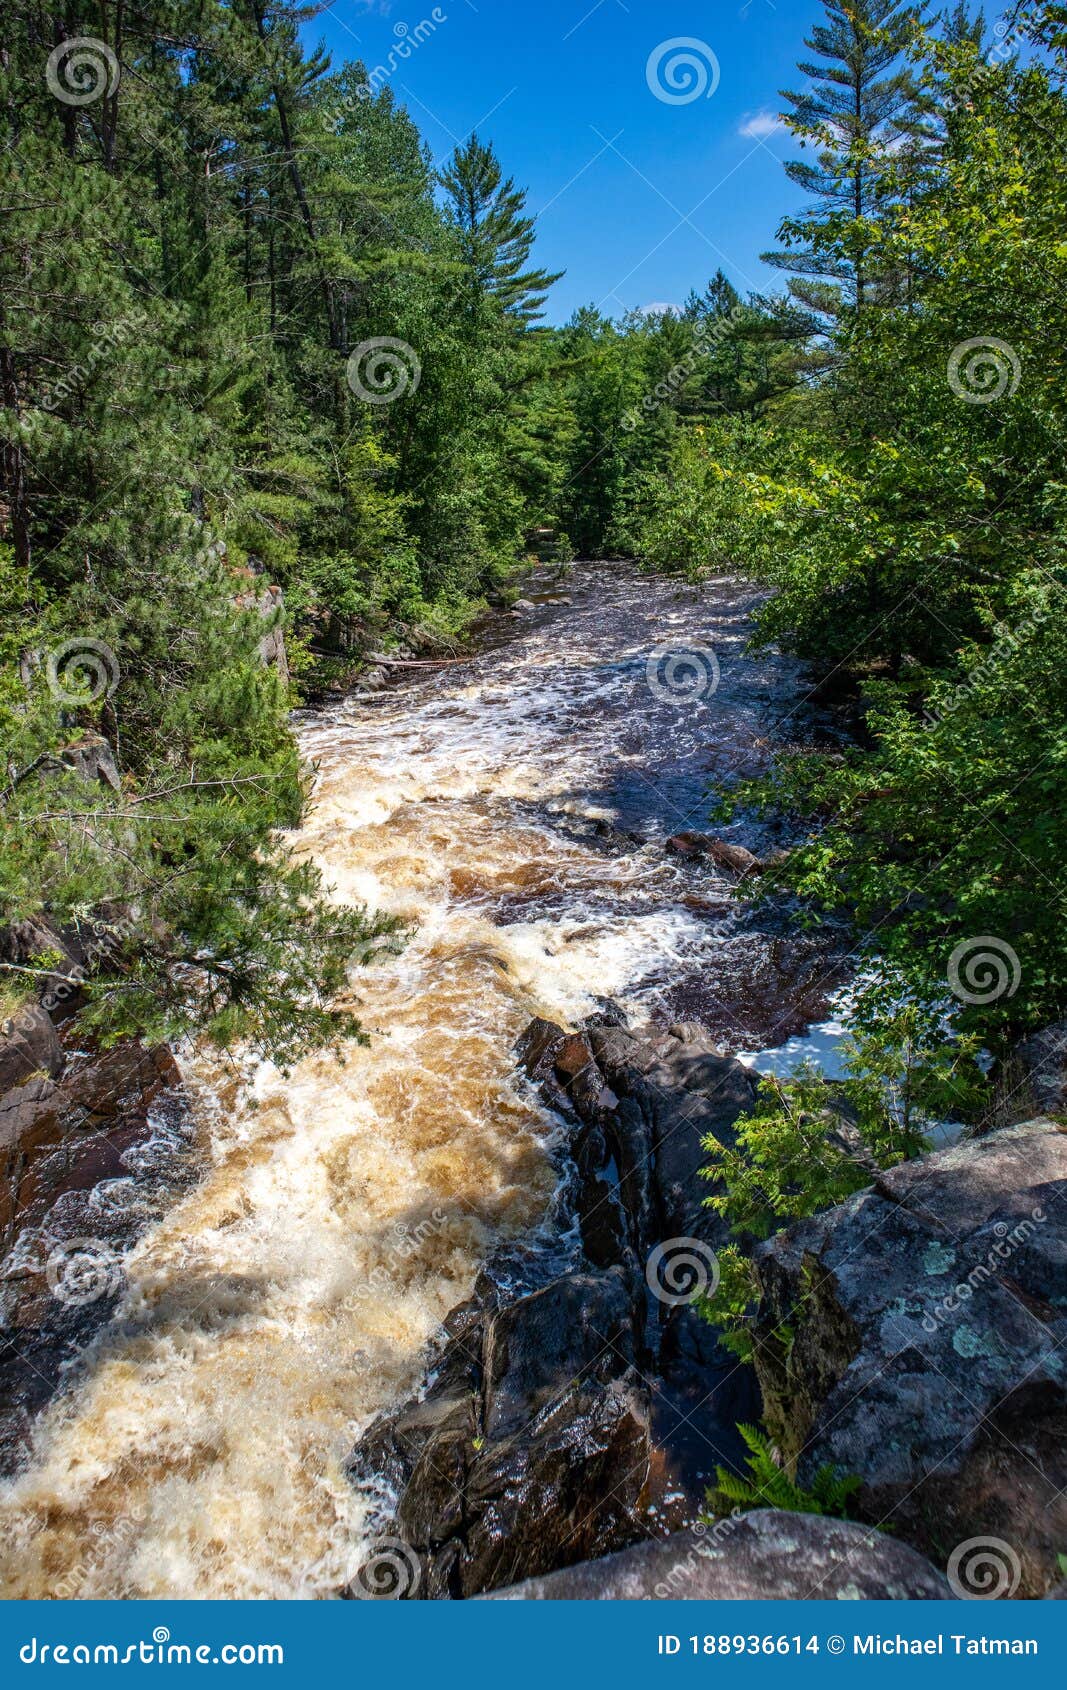 dave`s falls in marinette county, amberg, wisconsin june 2020 on the pike river